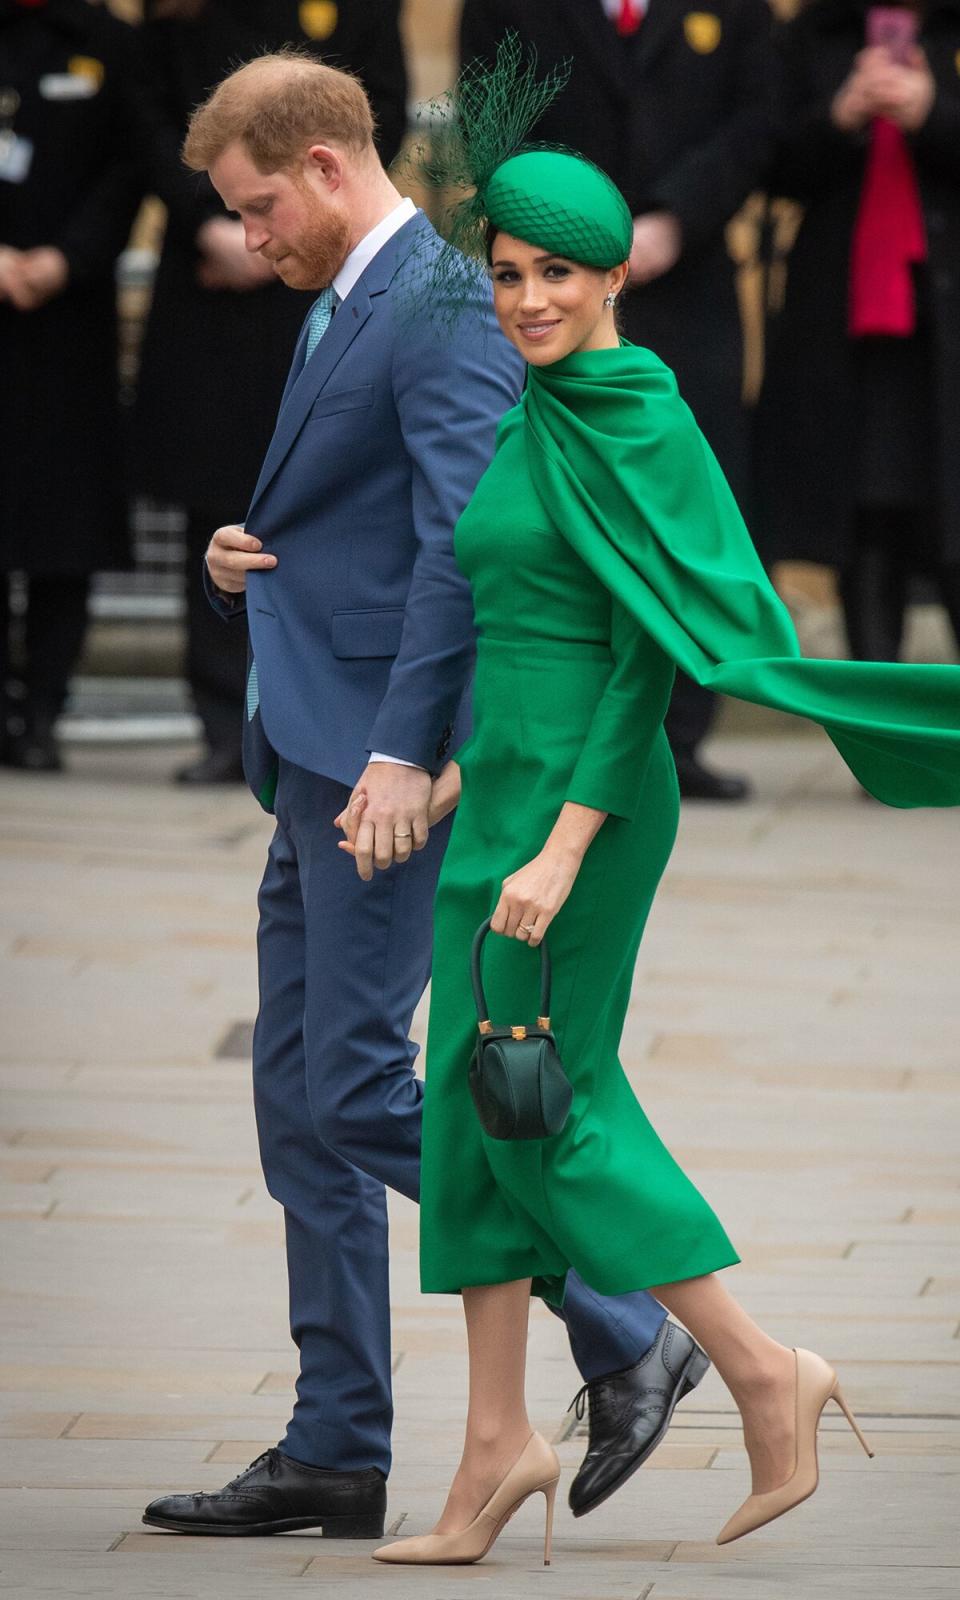 The Duke and Duchess of Sussex arrive at the Commonwealth Service at Westminster Abbey, London on Commonwealth Day